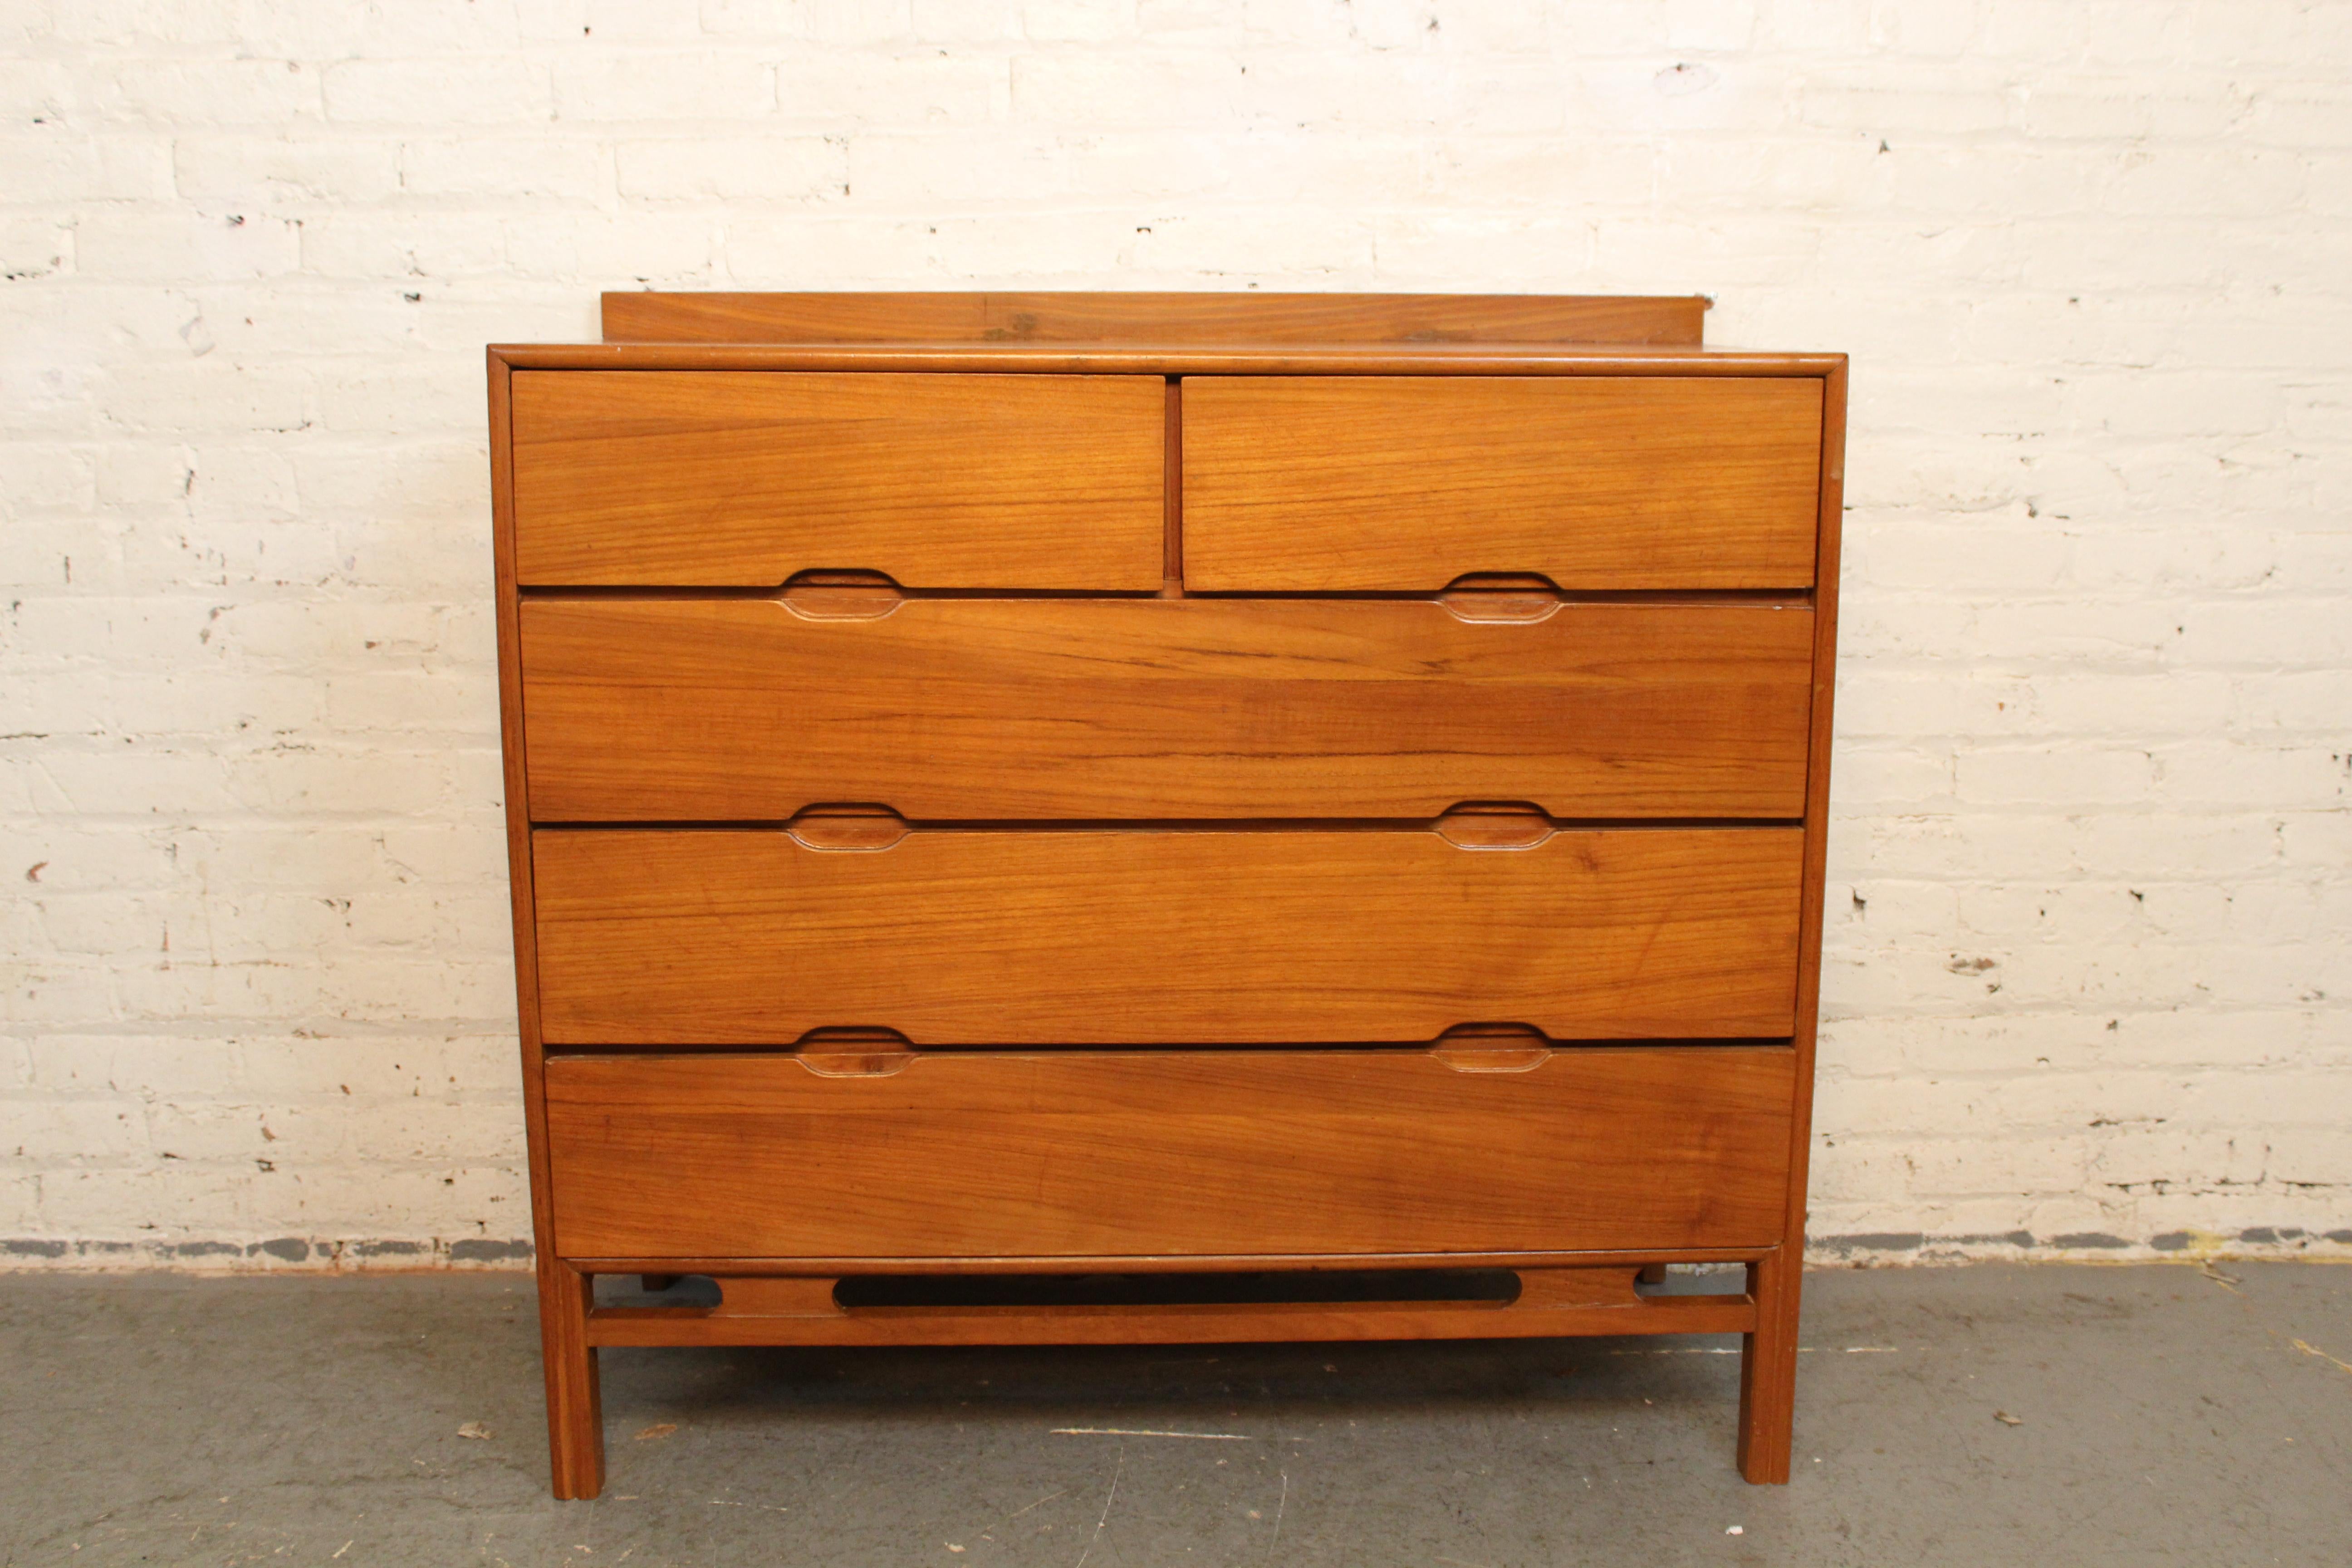 Don't miss out on classic Scandinavian modern design for your home! This petite mid-century teak chest of drawers has Danish style in spades- with carved oval drawer pulls, hourglass details, and bold geometric lines. Five total drawers offer plenty